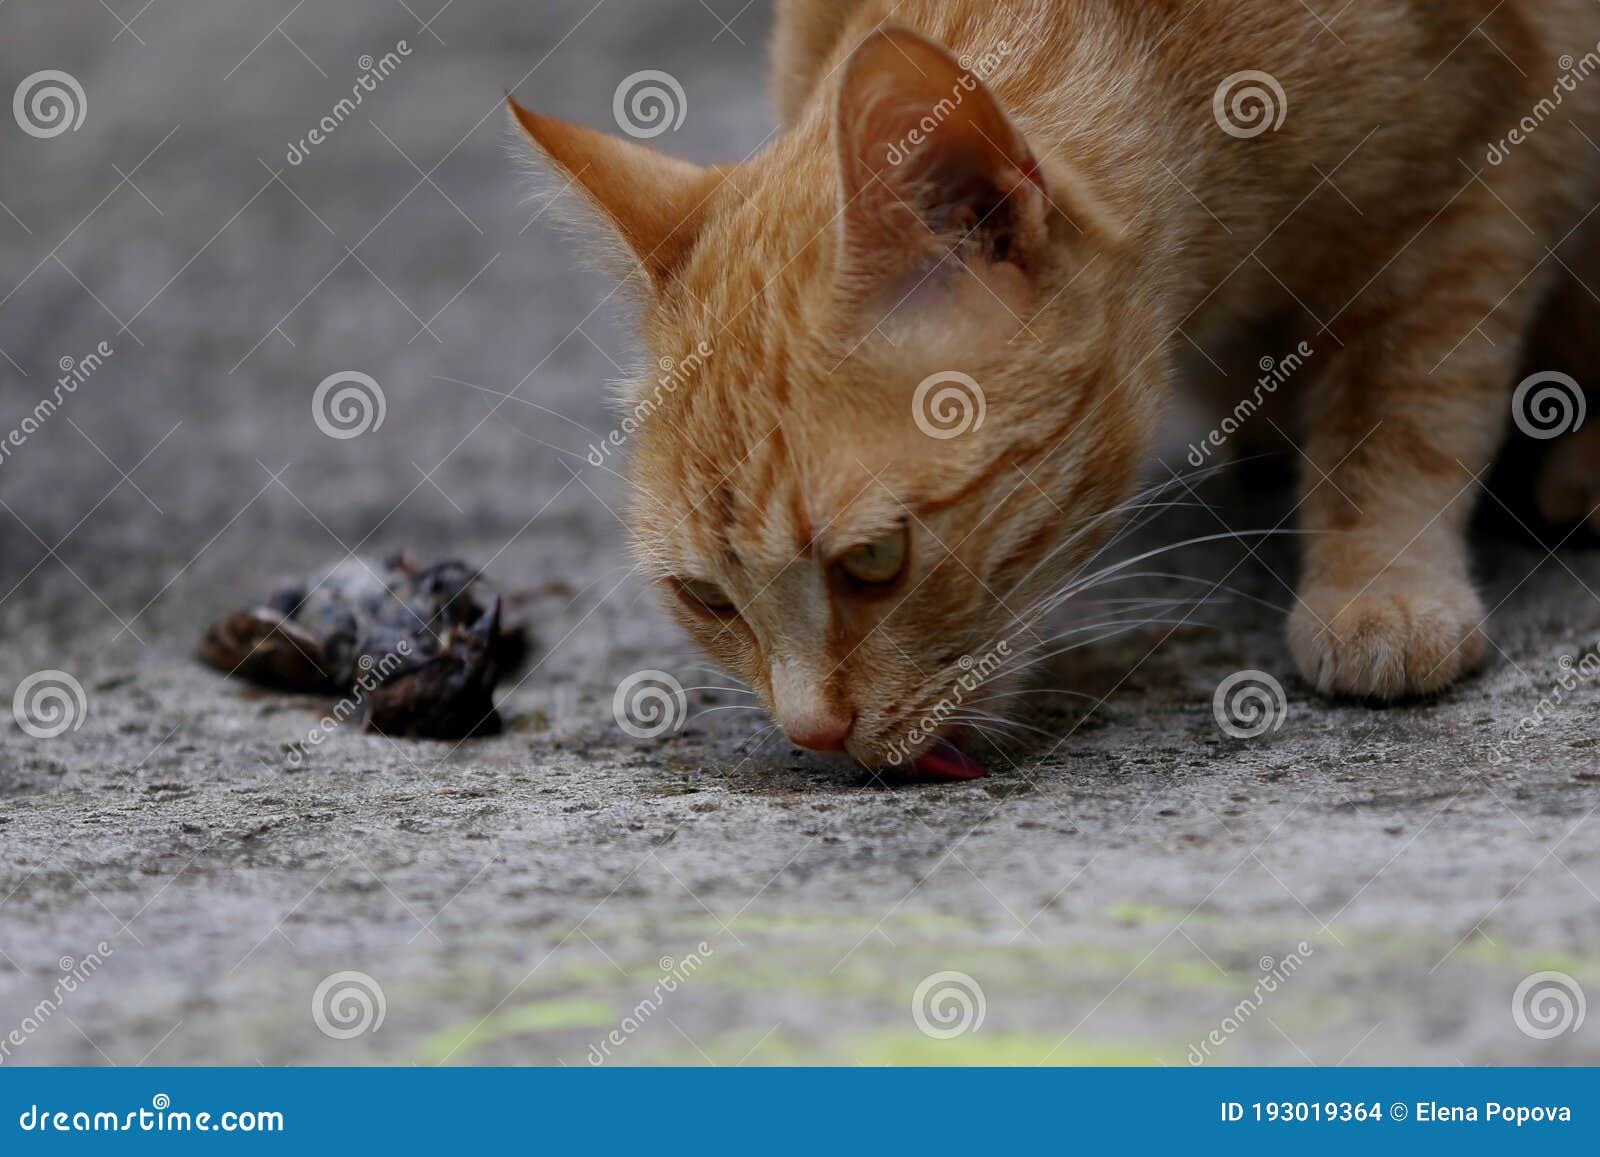 248 Cat Sparrow Photos Free Royalty Free Stock Photos From Dreamstime